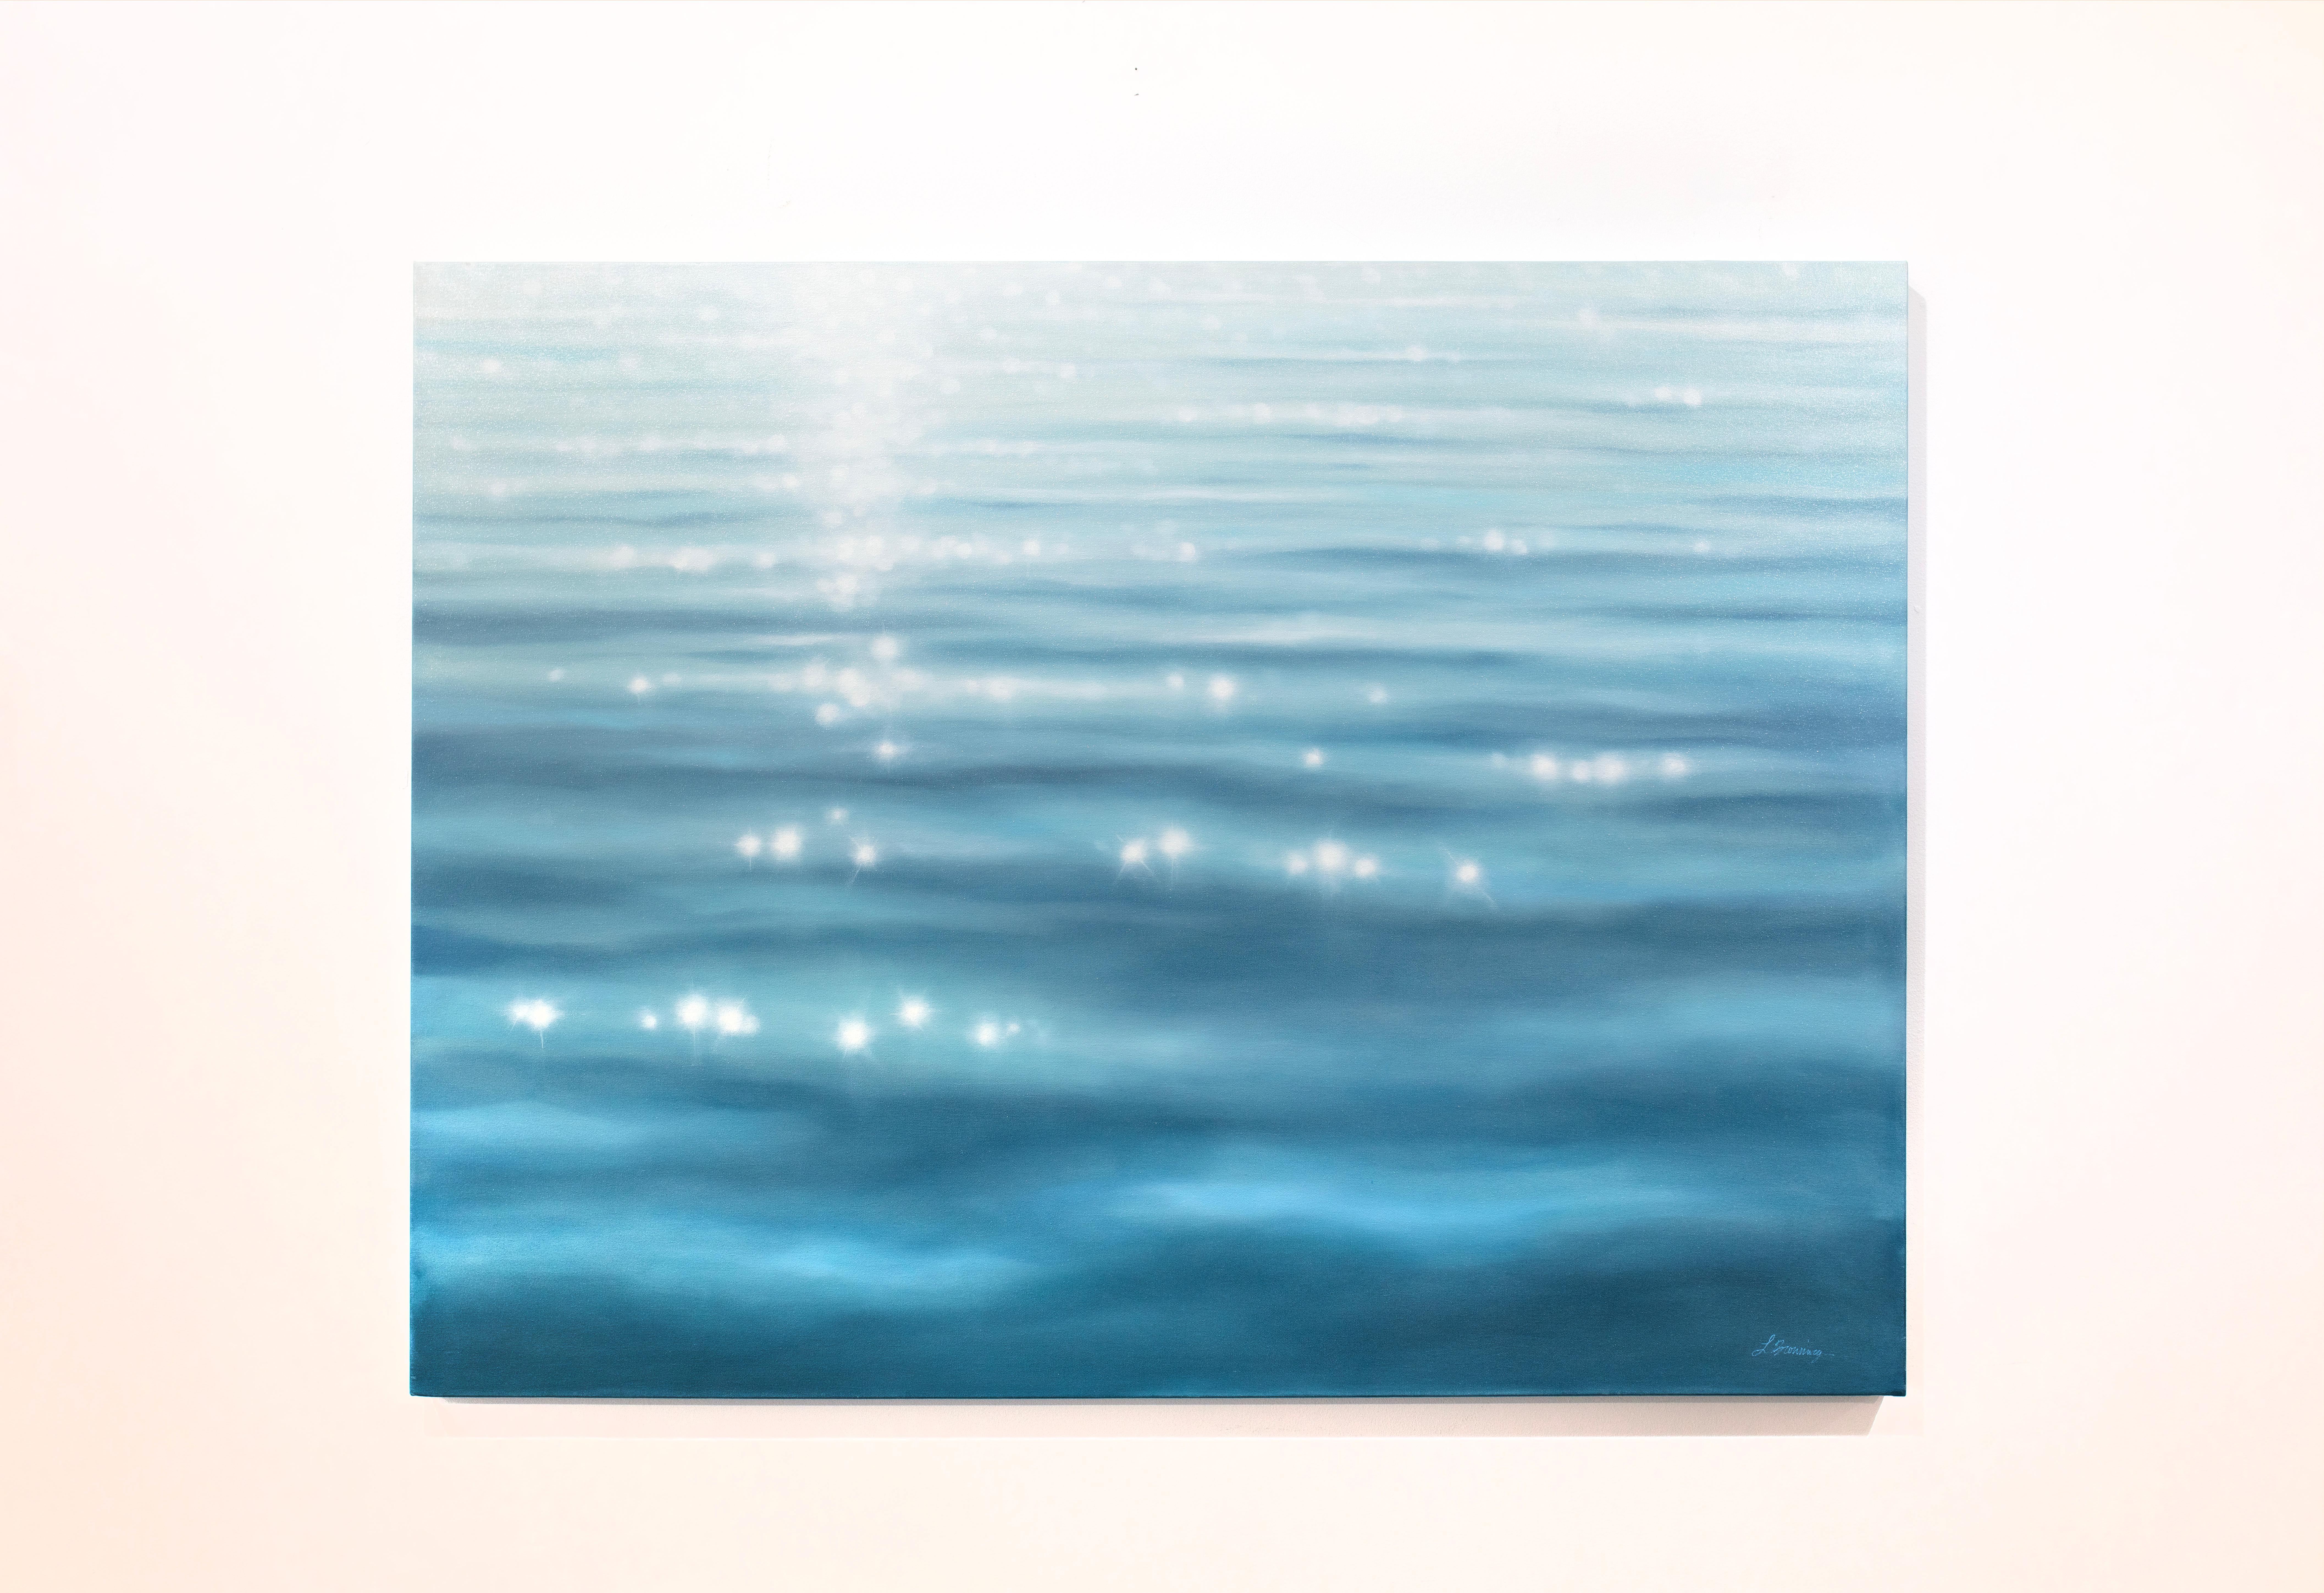 This representational blue coastal oil painting by artist Laura Browning features a close-up cropped view of the surface of open water, with light glistening across light waves. It is made on gallery wrapped canvas with the painting continuing over